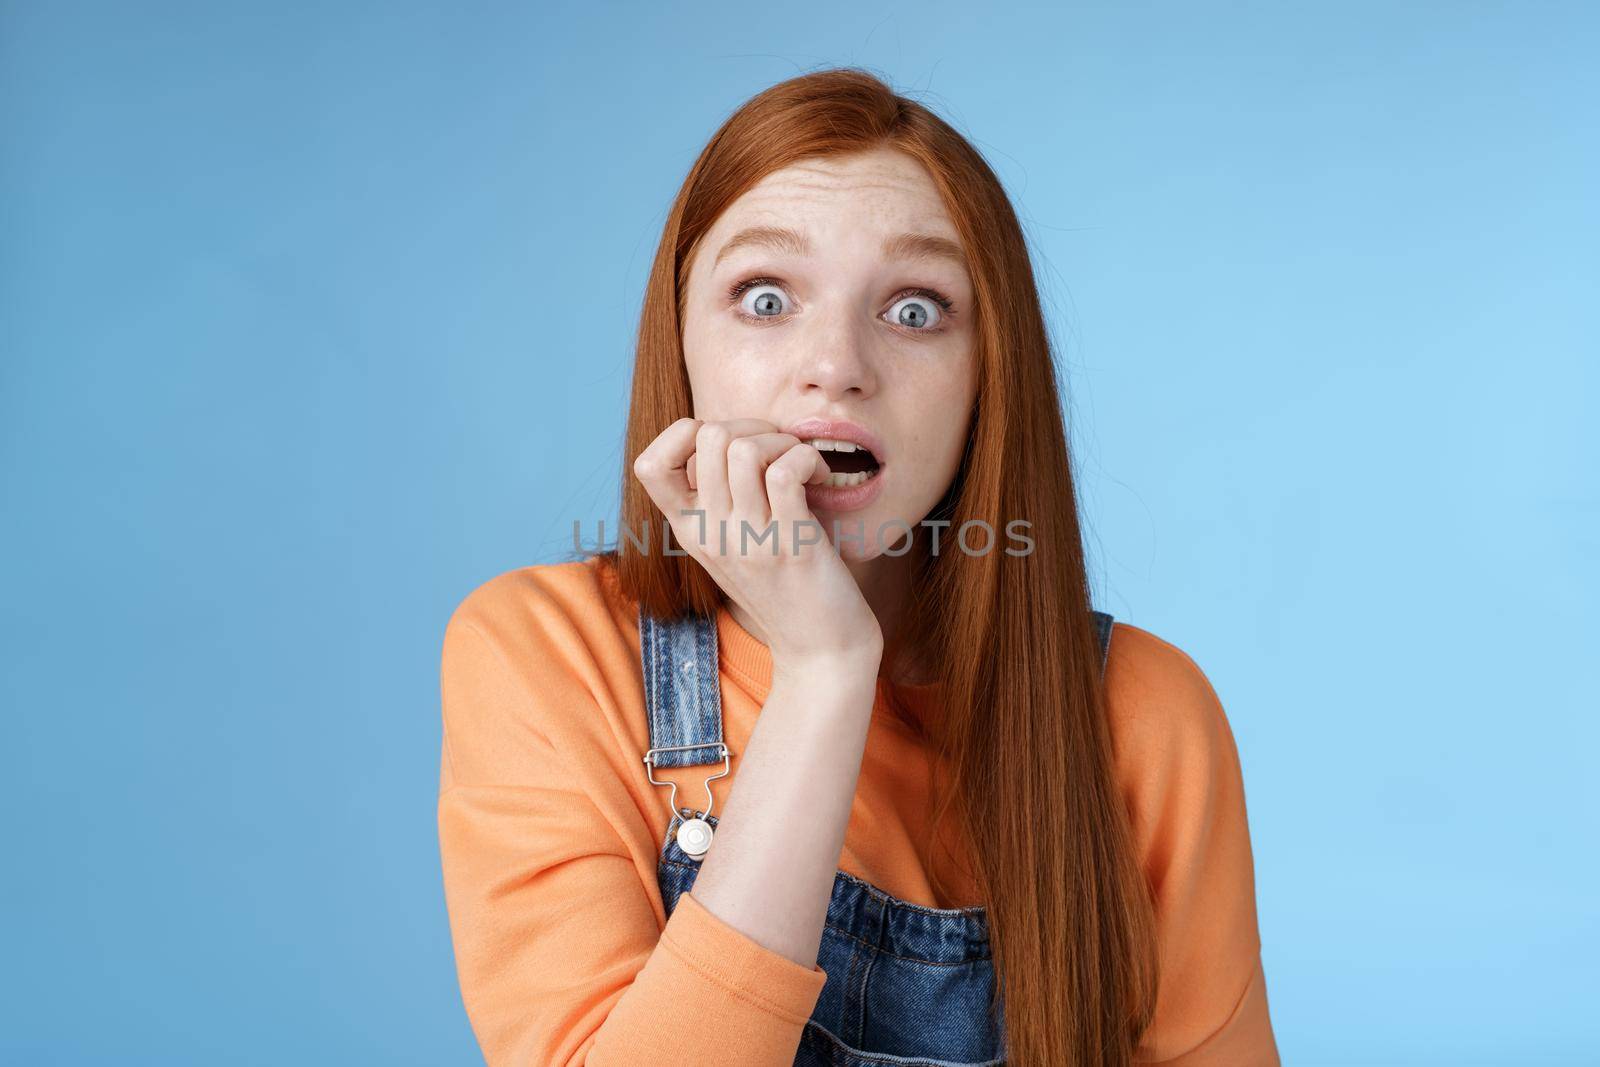 Scared unconfident anxious young trembling redhead girl wide eyes staring intense emotional biting fingernails, fan worry favorite character tv series dies standing nervously blue background.